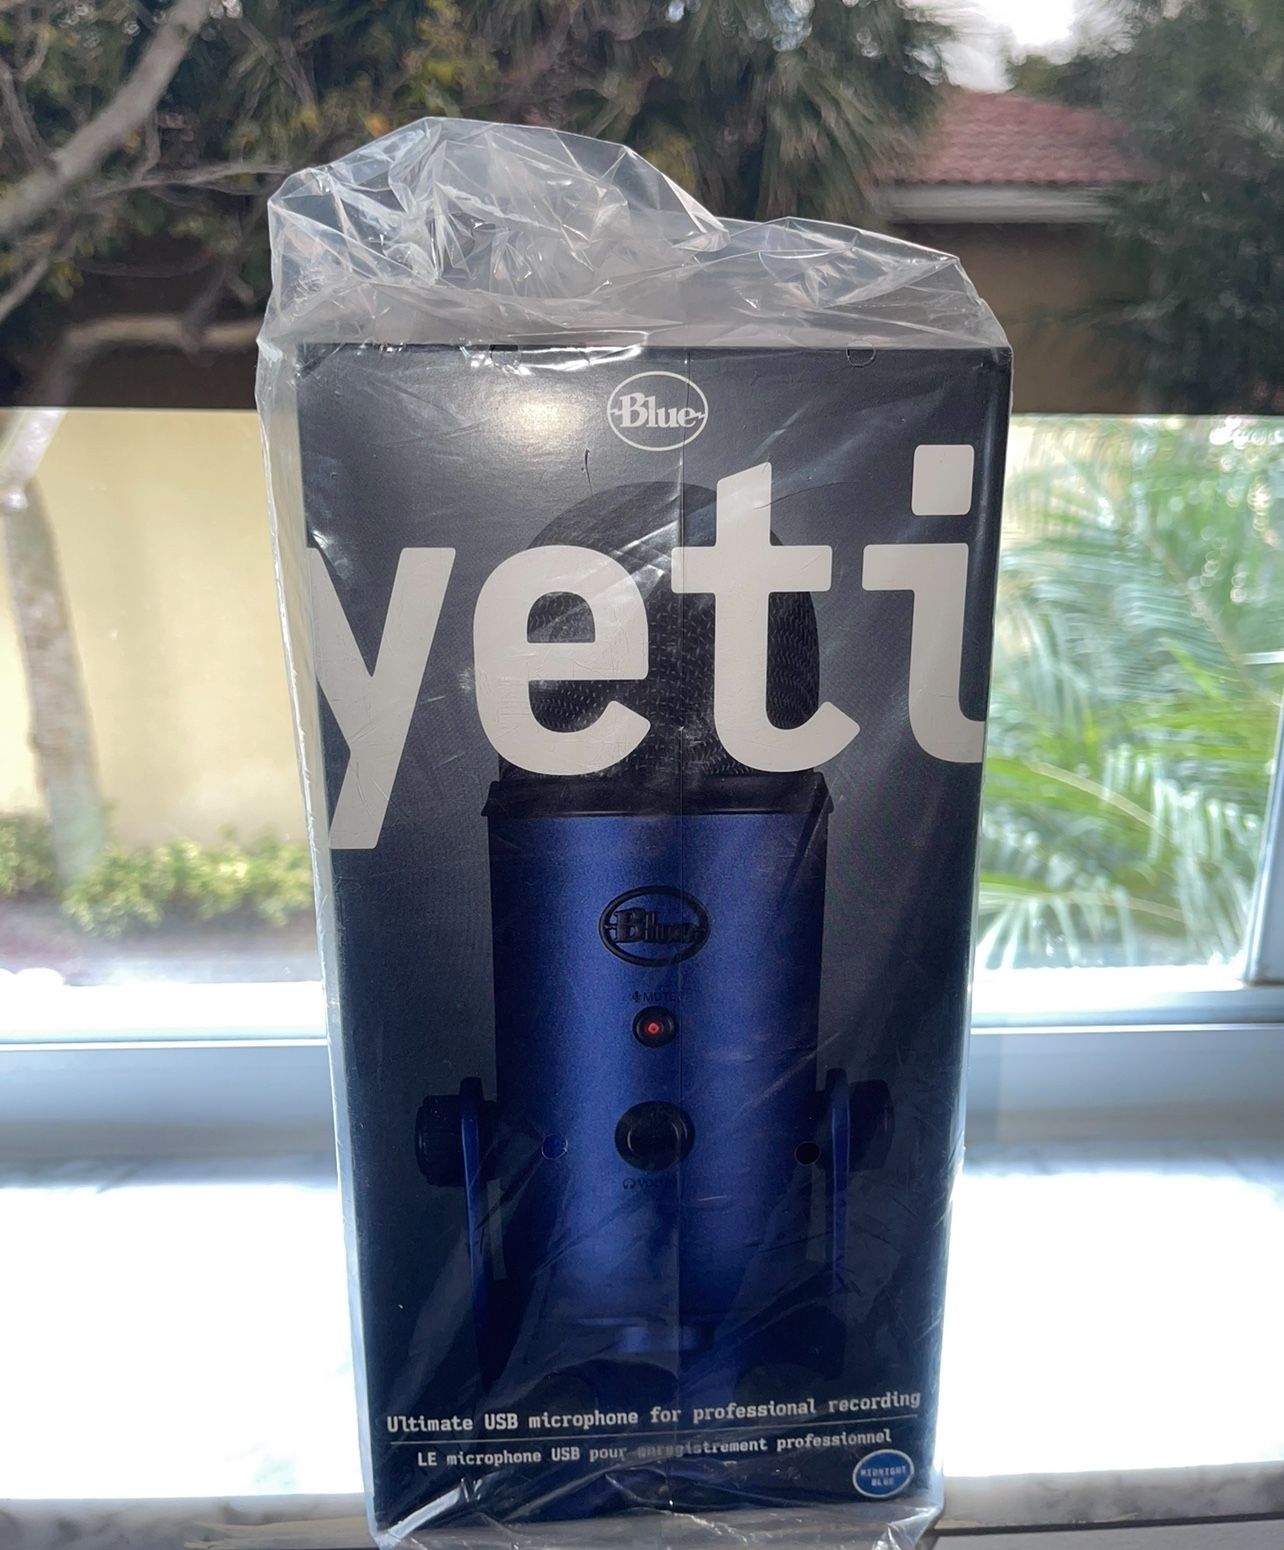 Yeti Blue USB Microphone for PC, Mac, Gaming, Recording, Streaming, Podcasting, Studio and Computer Condenser Mic with Blue VO!CE Brand New